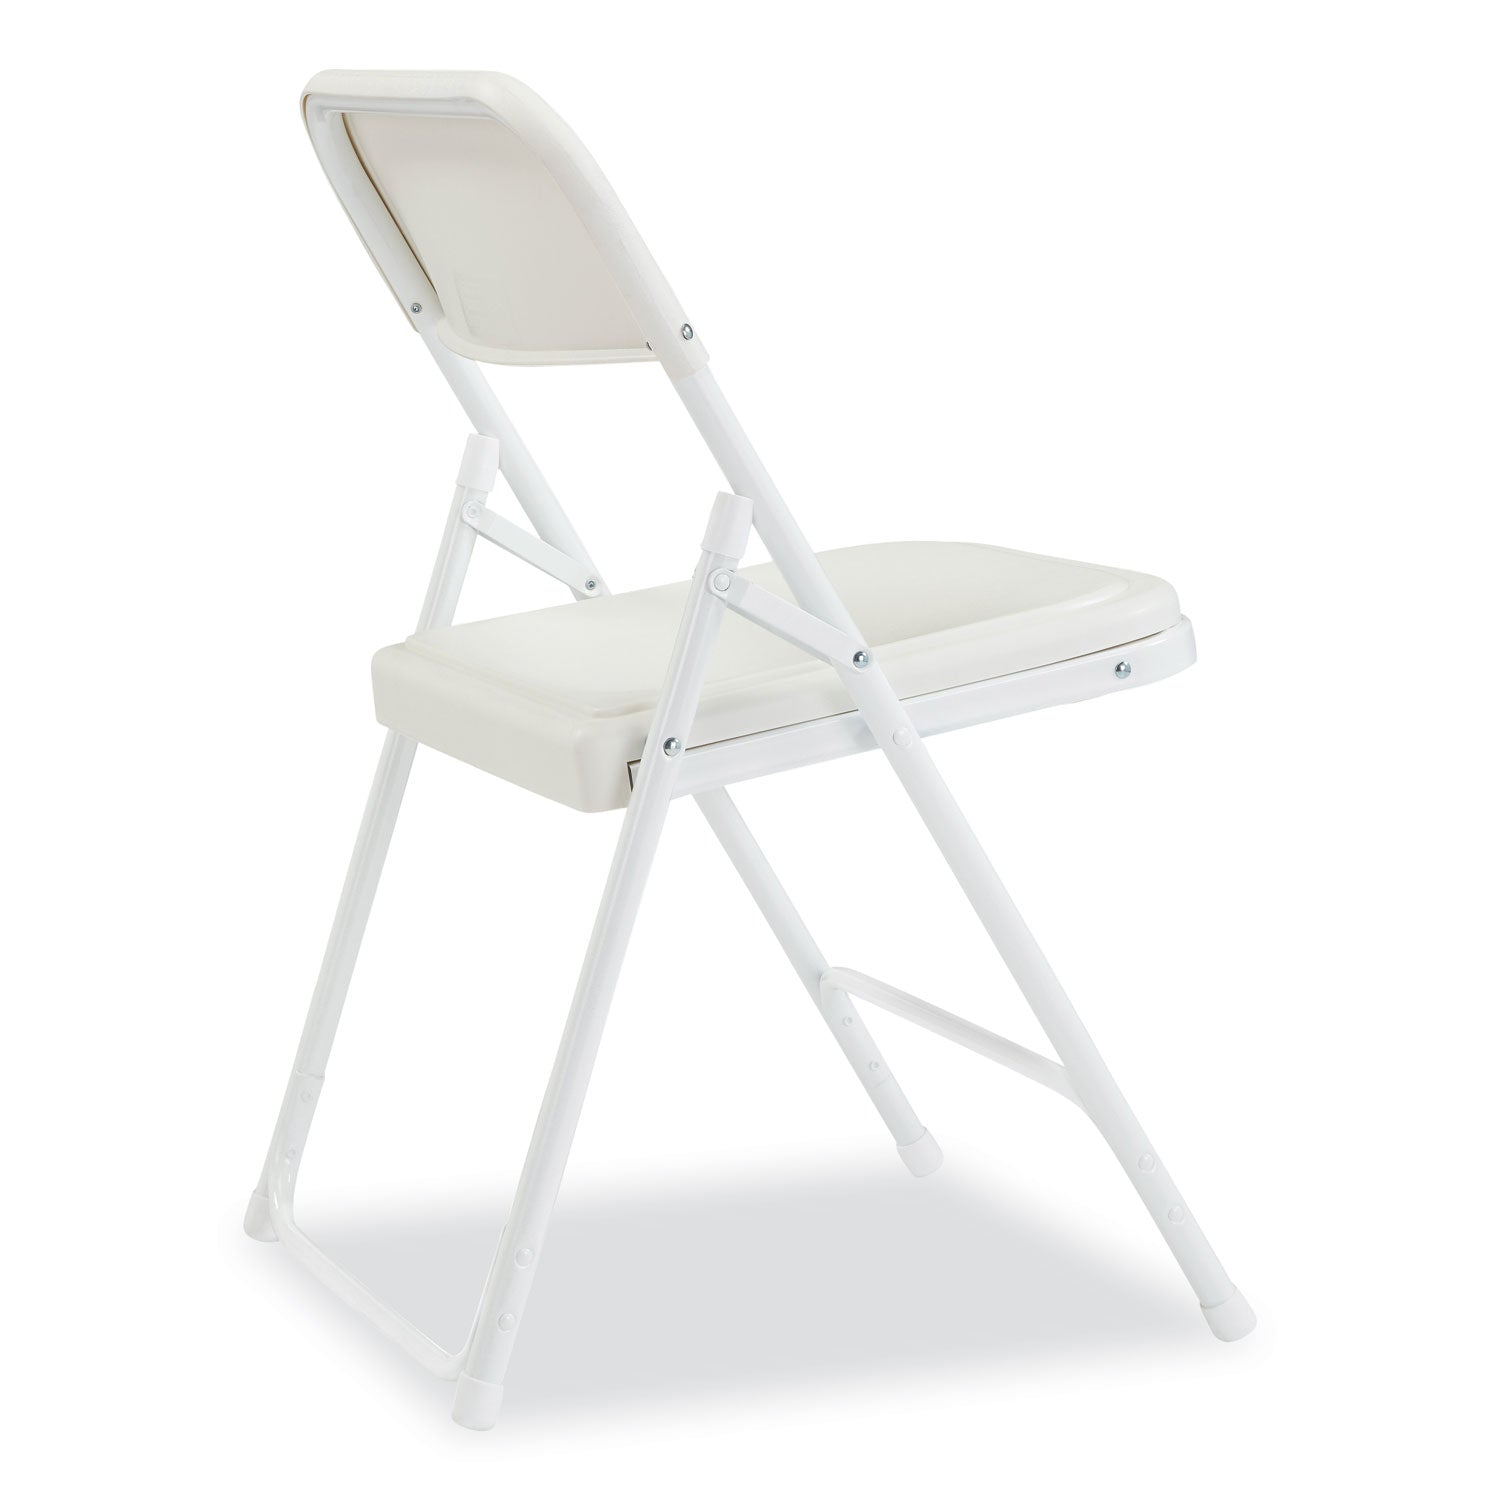 800-series-plastic-folding-chair-supports-500-lb-18-seat-ht-bright-white-seat-white-base-4-ct-ships-in-1-3-bus-days_nps821 - 4